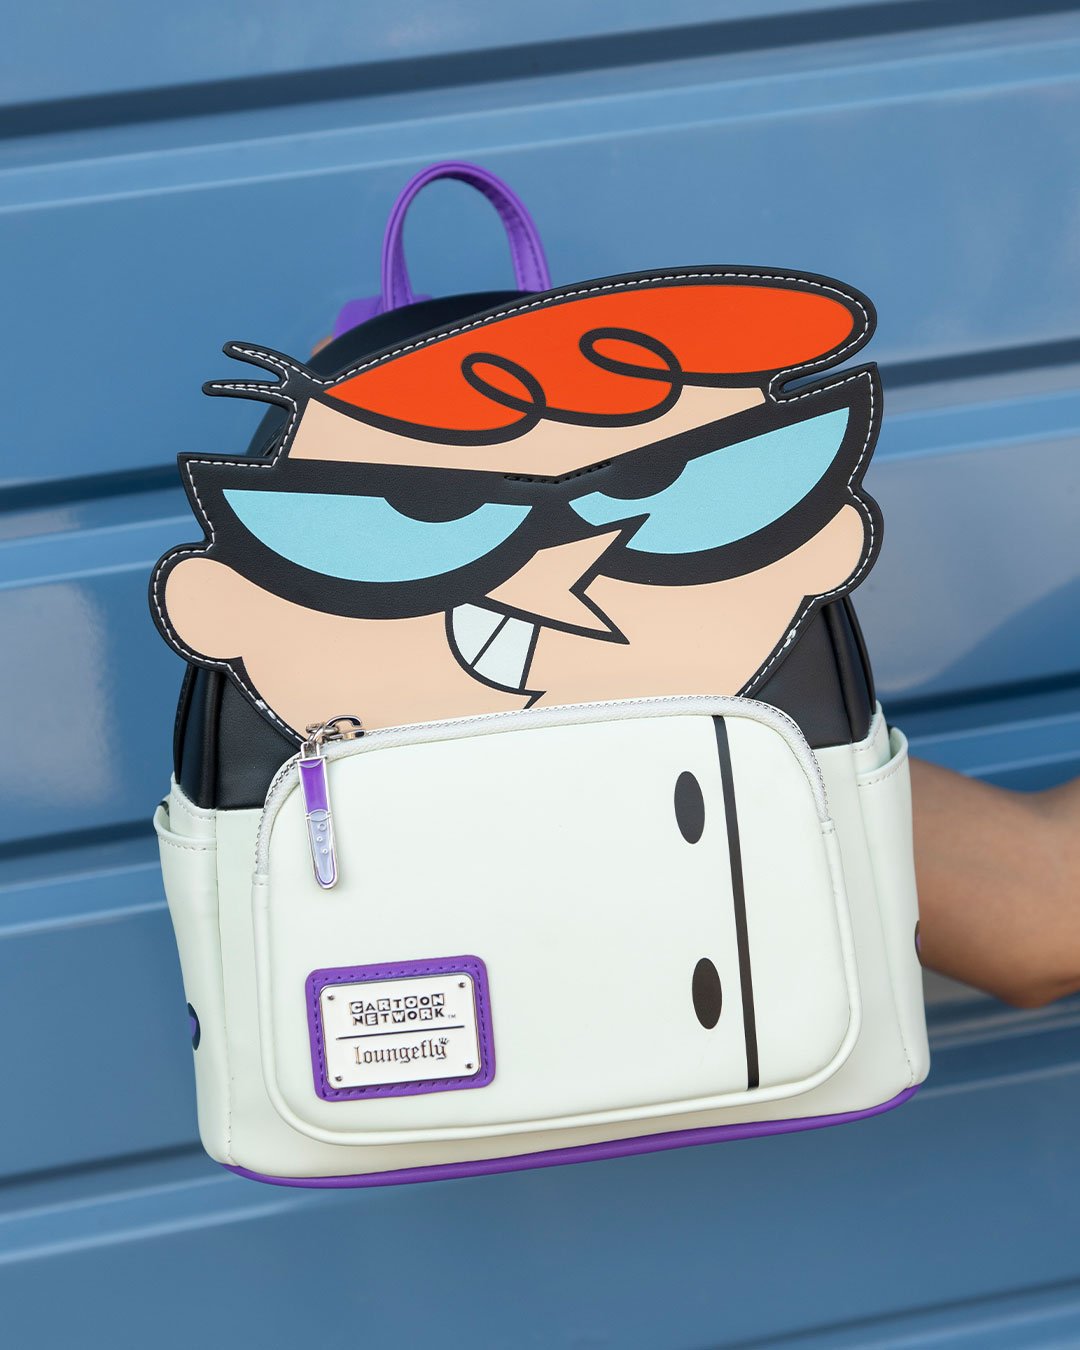 Loungefly Cartoon Network Dexter Glow in the Dark Cosplay Mini Backpack - 707 Street Exclusive - Dexter Loungefly Backpack in Front of Blue Wall